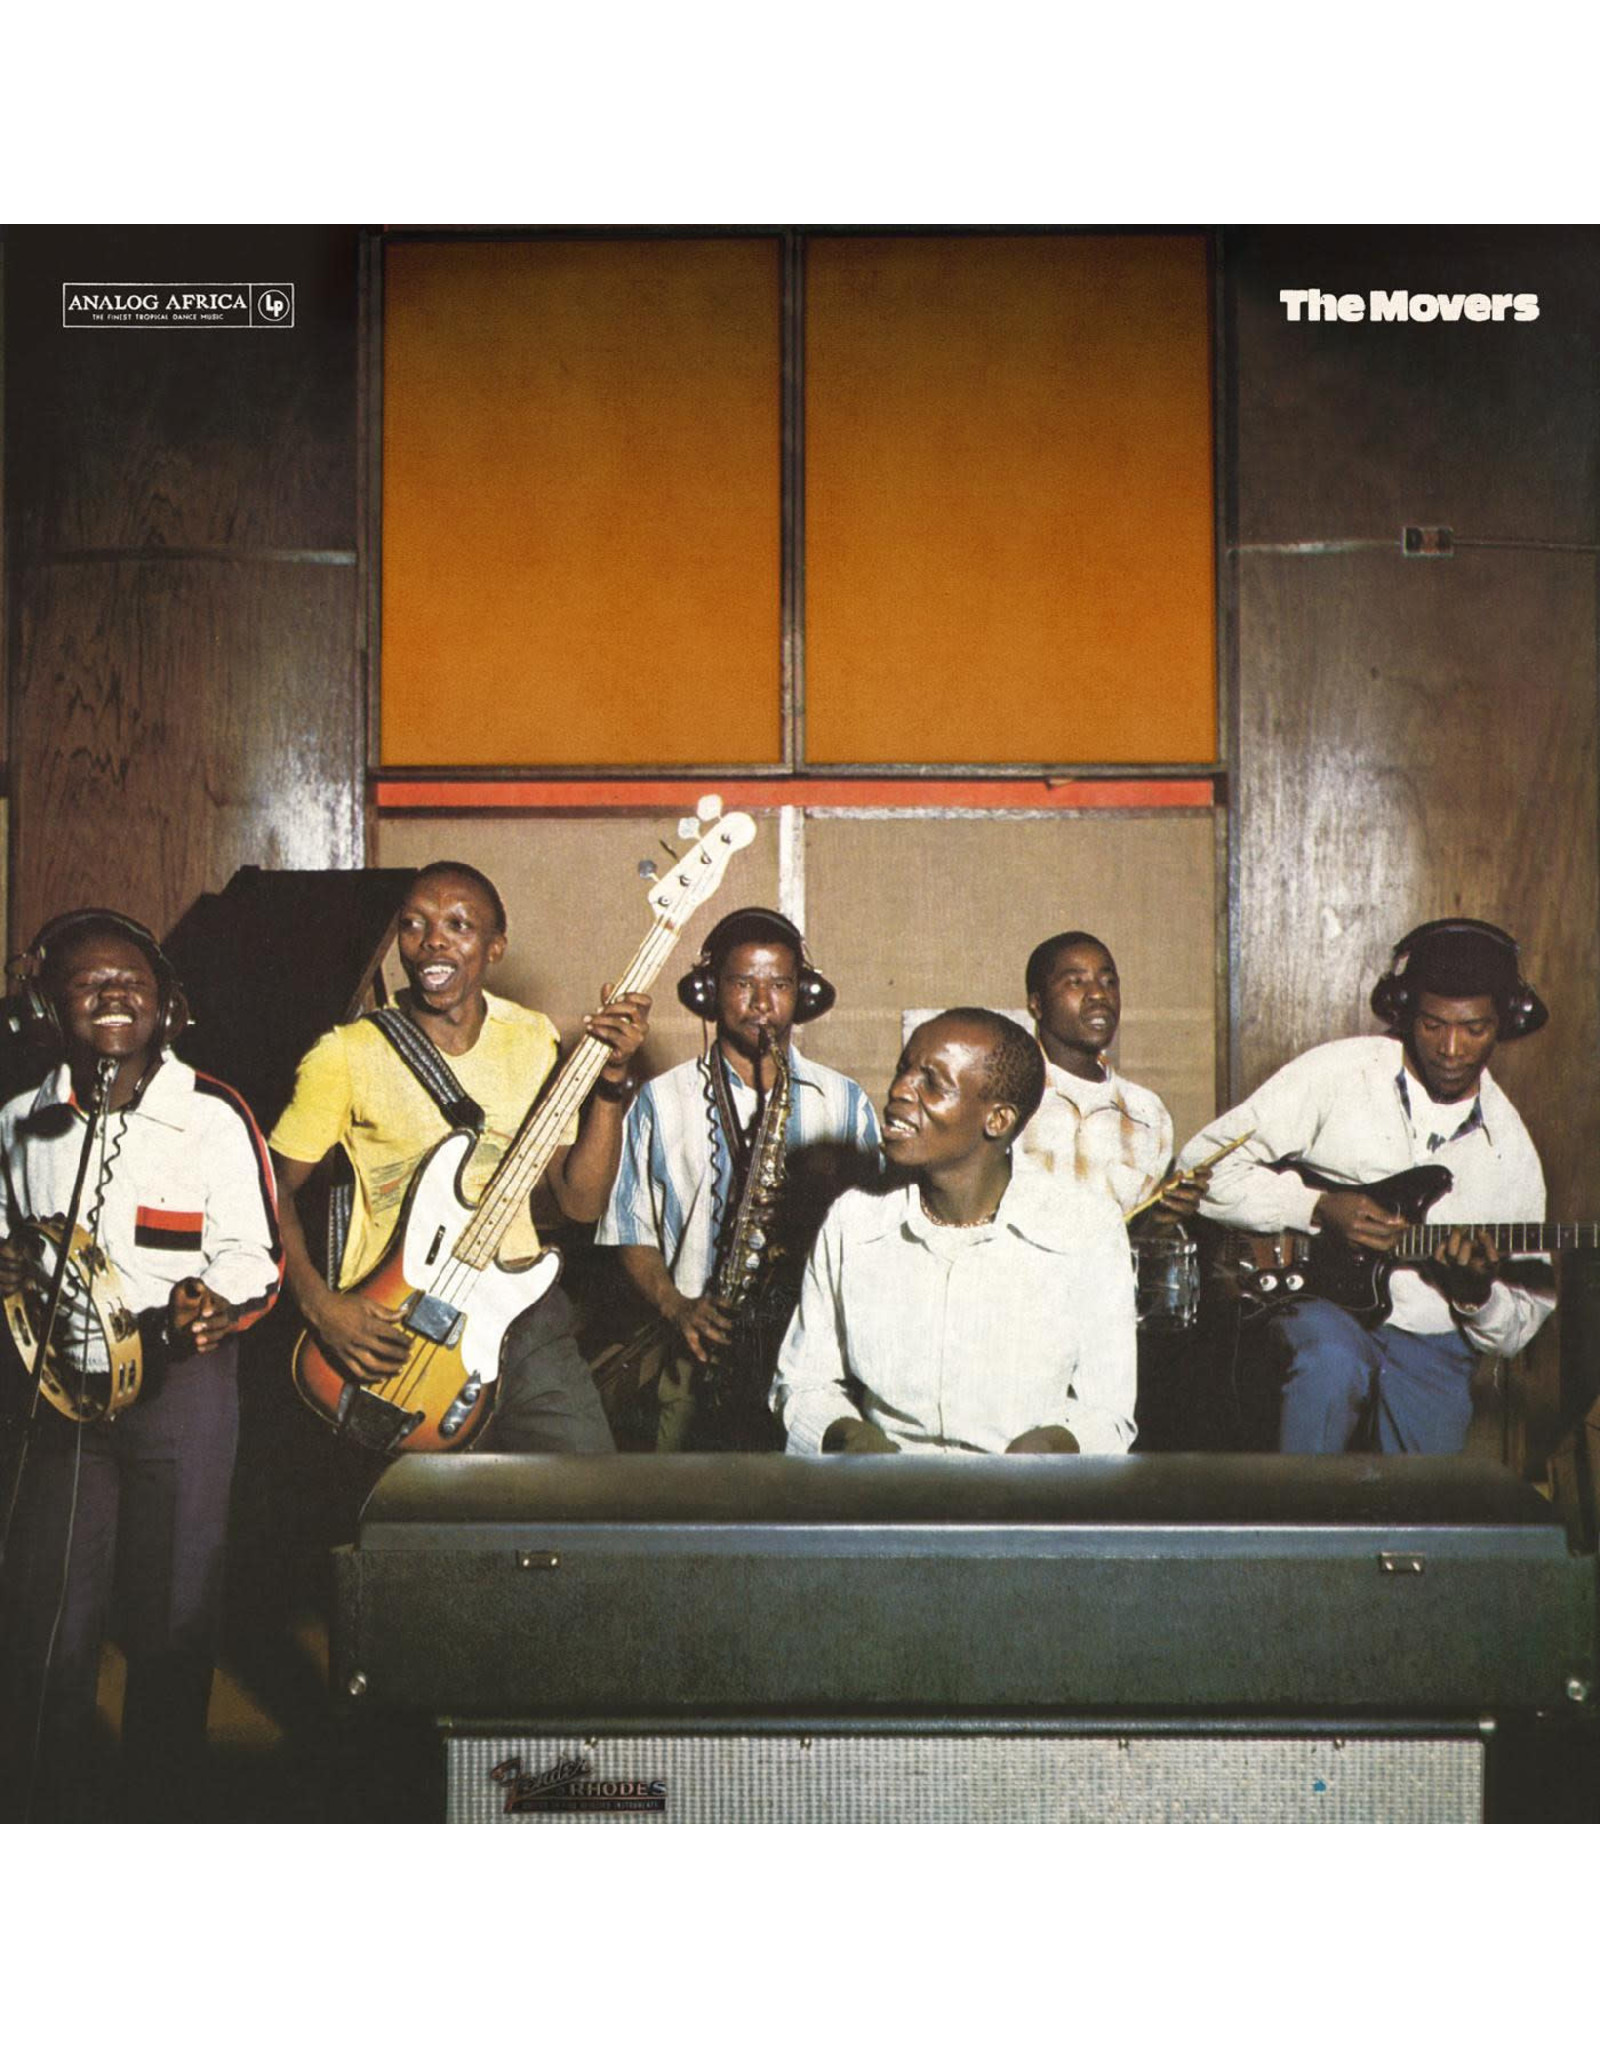 Analog Africa Movers, The: The Movers - Vol. 1 - 1970-1976 LP